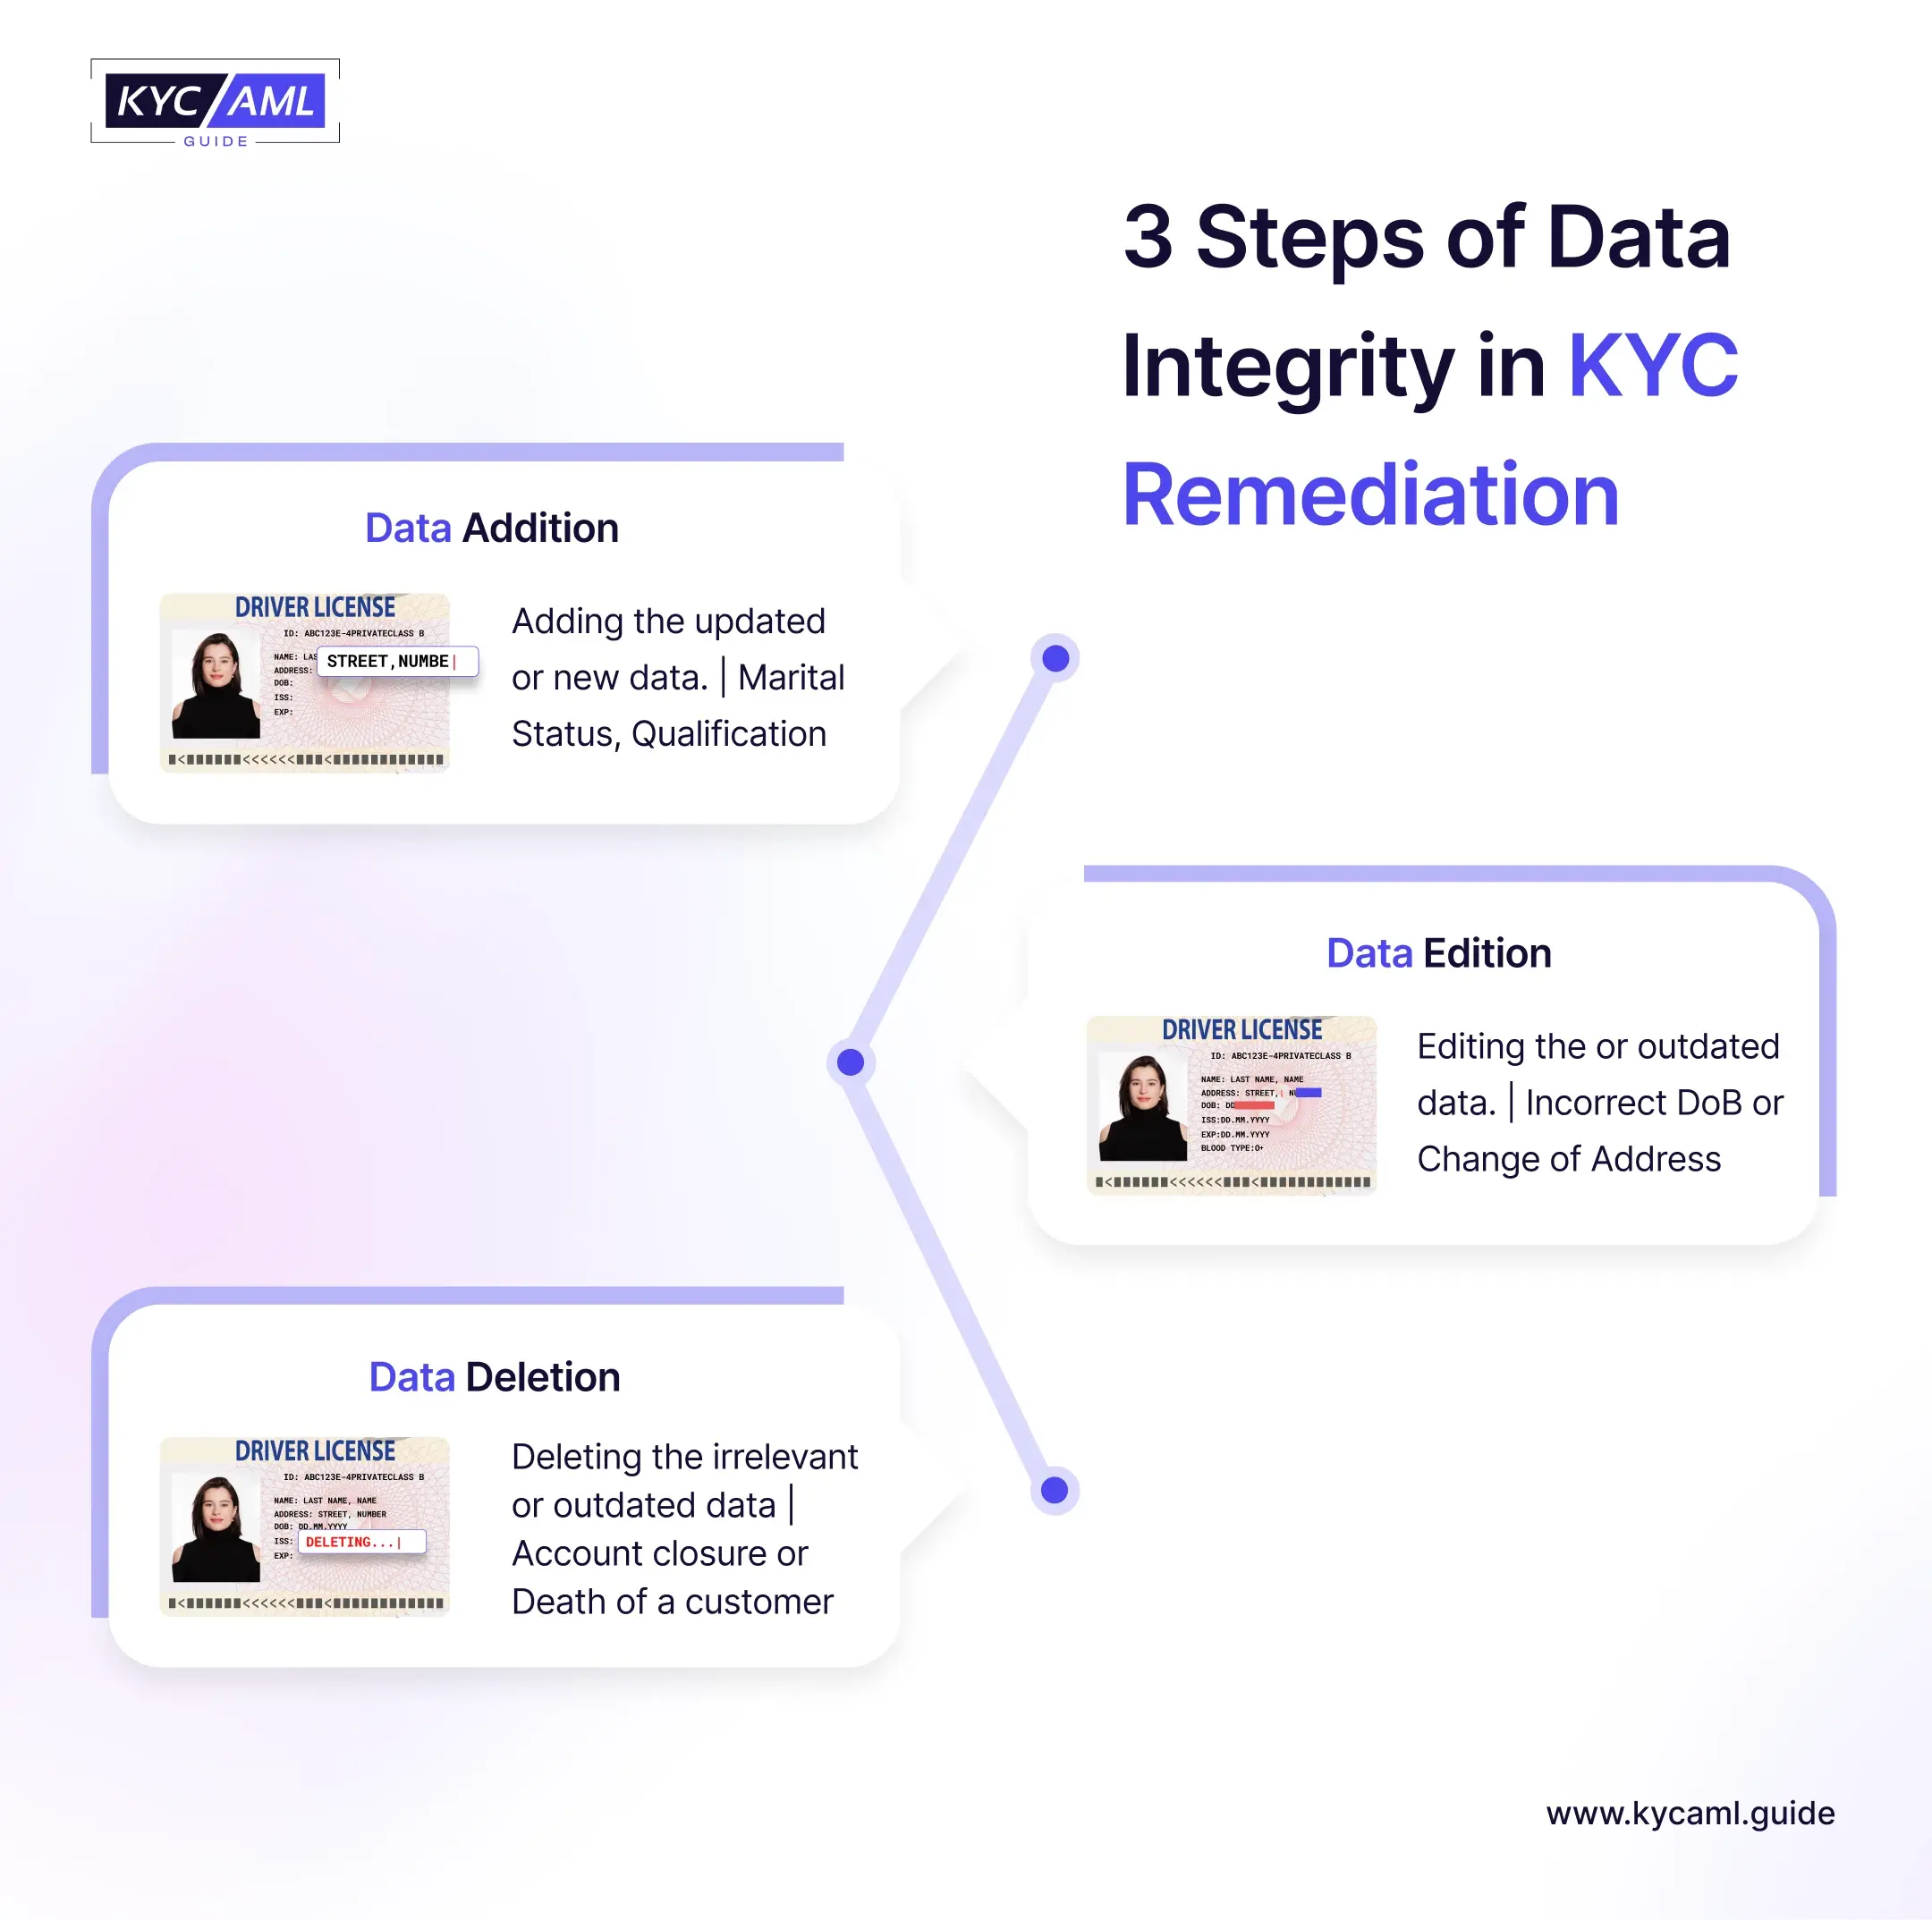 Here KYC Vendor can take three steps to ensure data integrity such as: